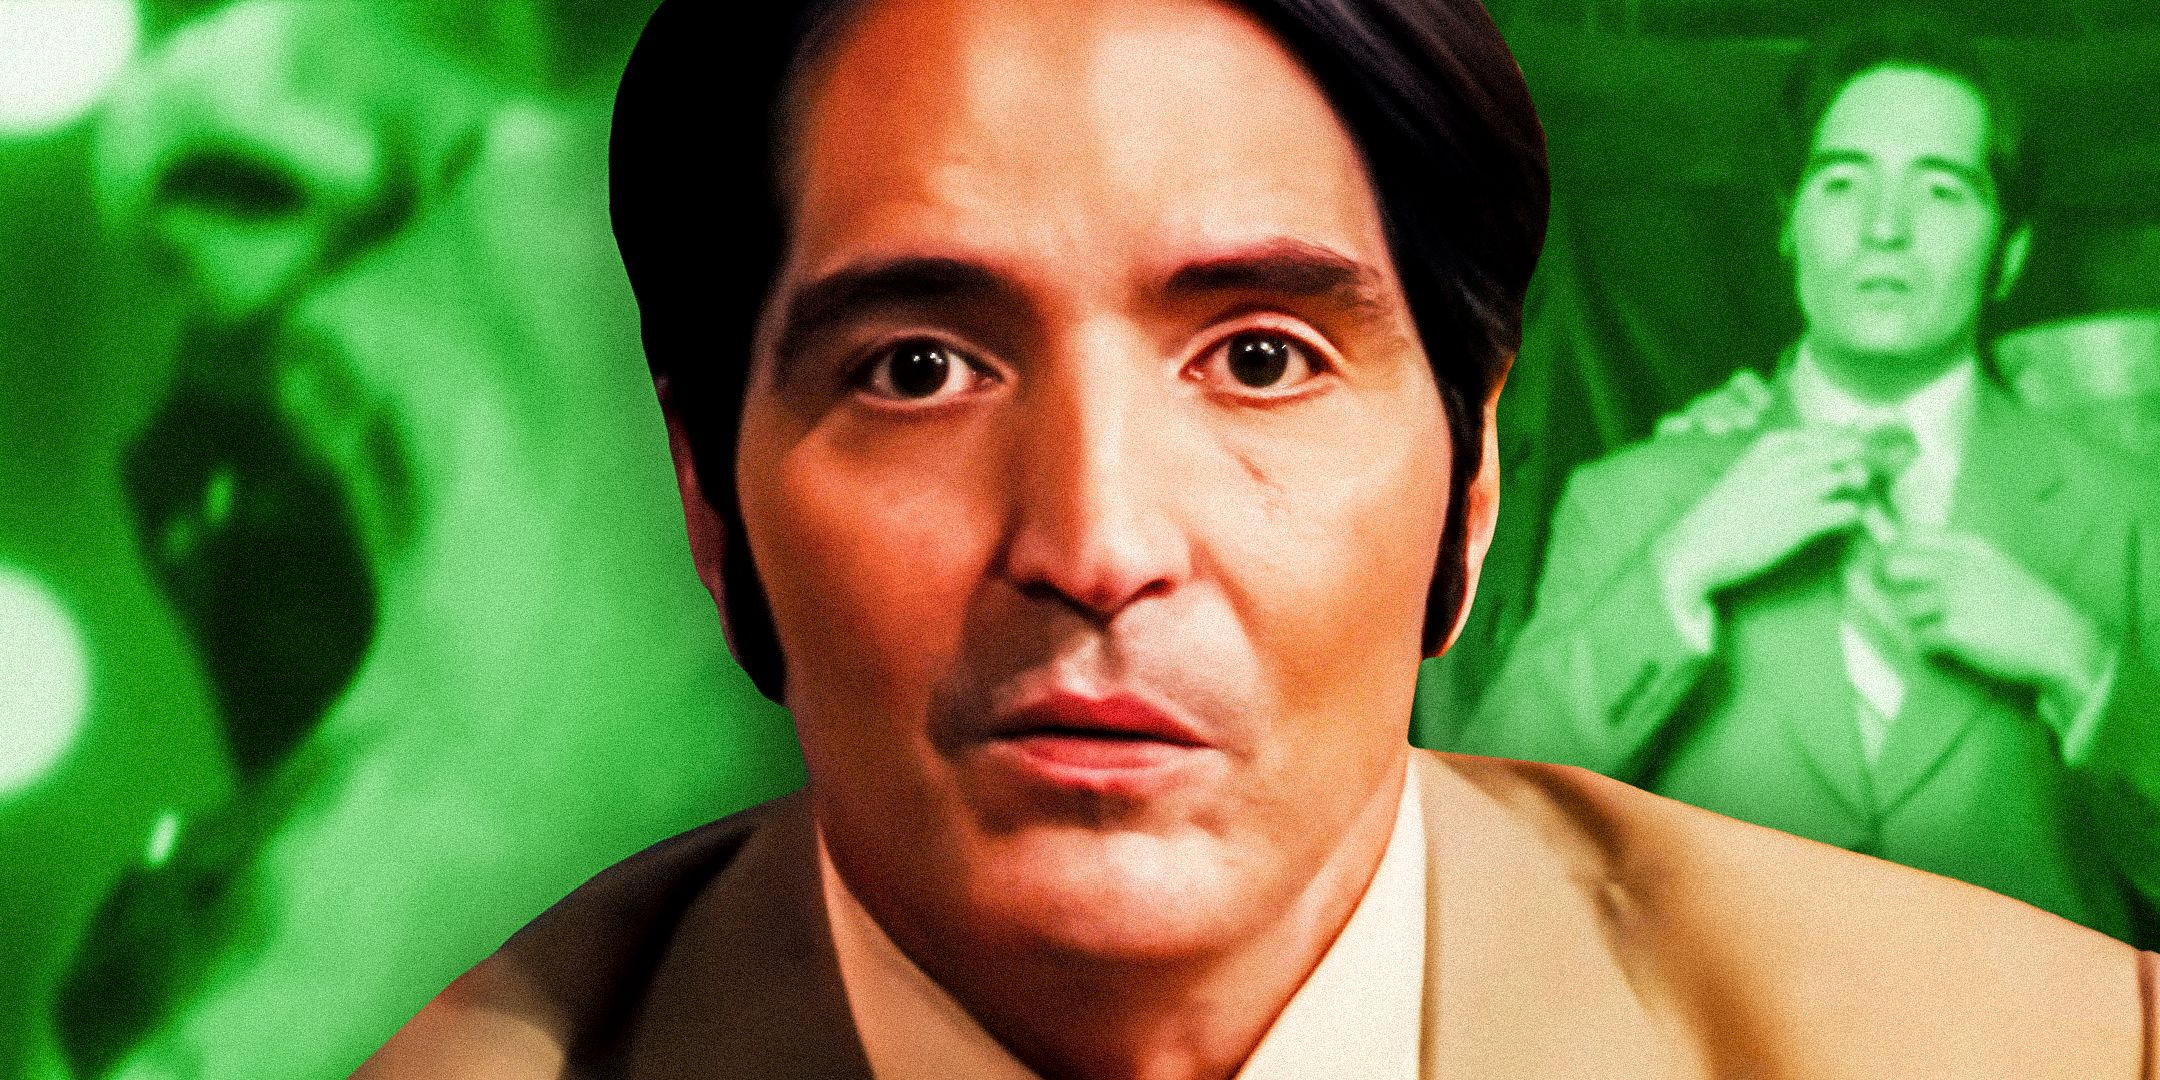 David-Dastmalchian-as-Jack-Delroy-from-Late-Night-With-The-Devil-